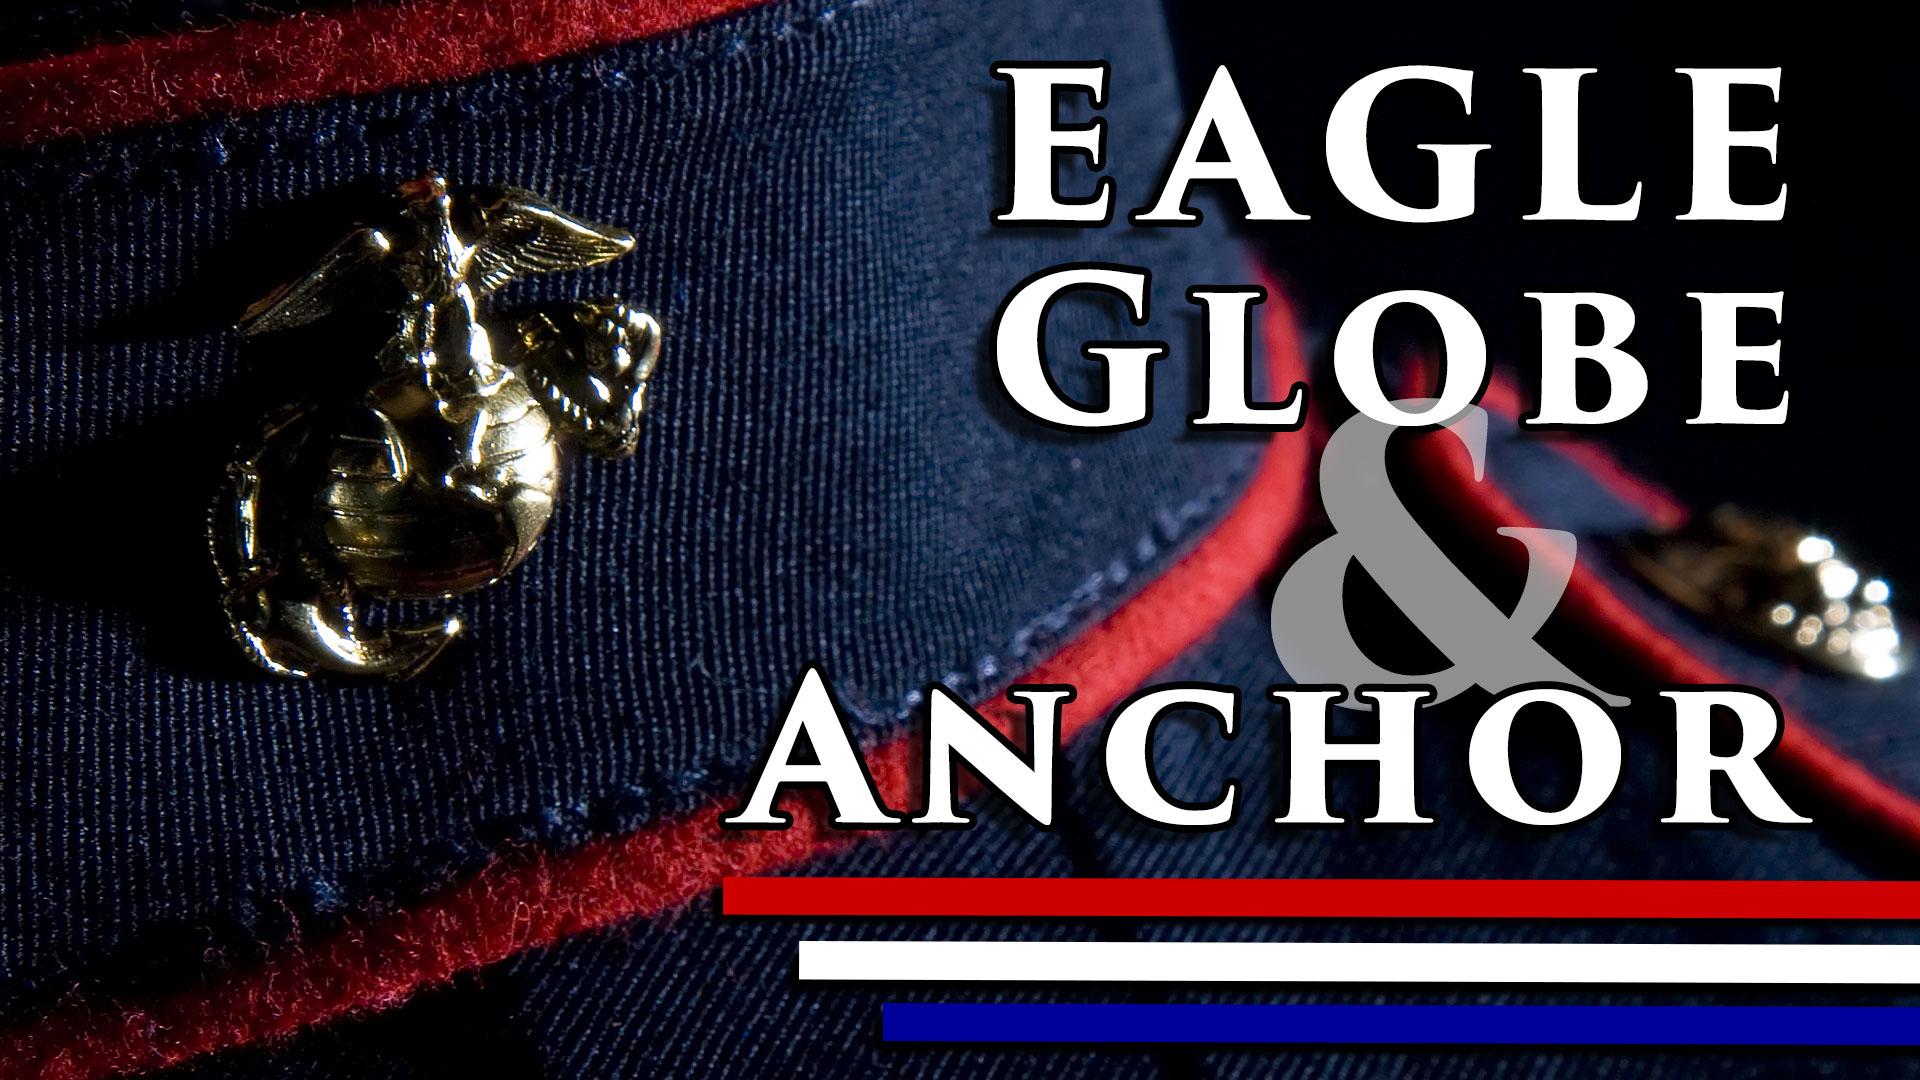 What does the Marine Corps Eagle Globe and Anchor stand for?